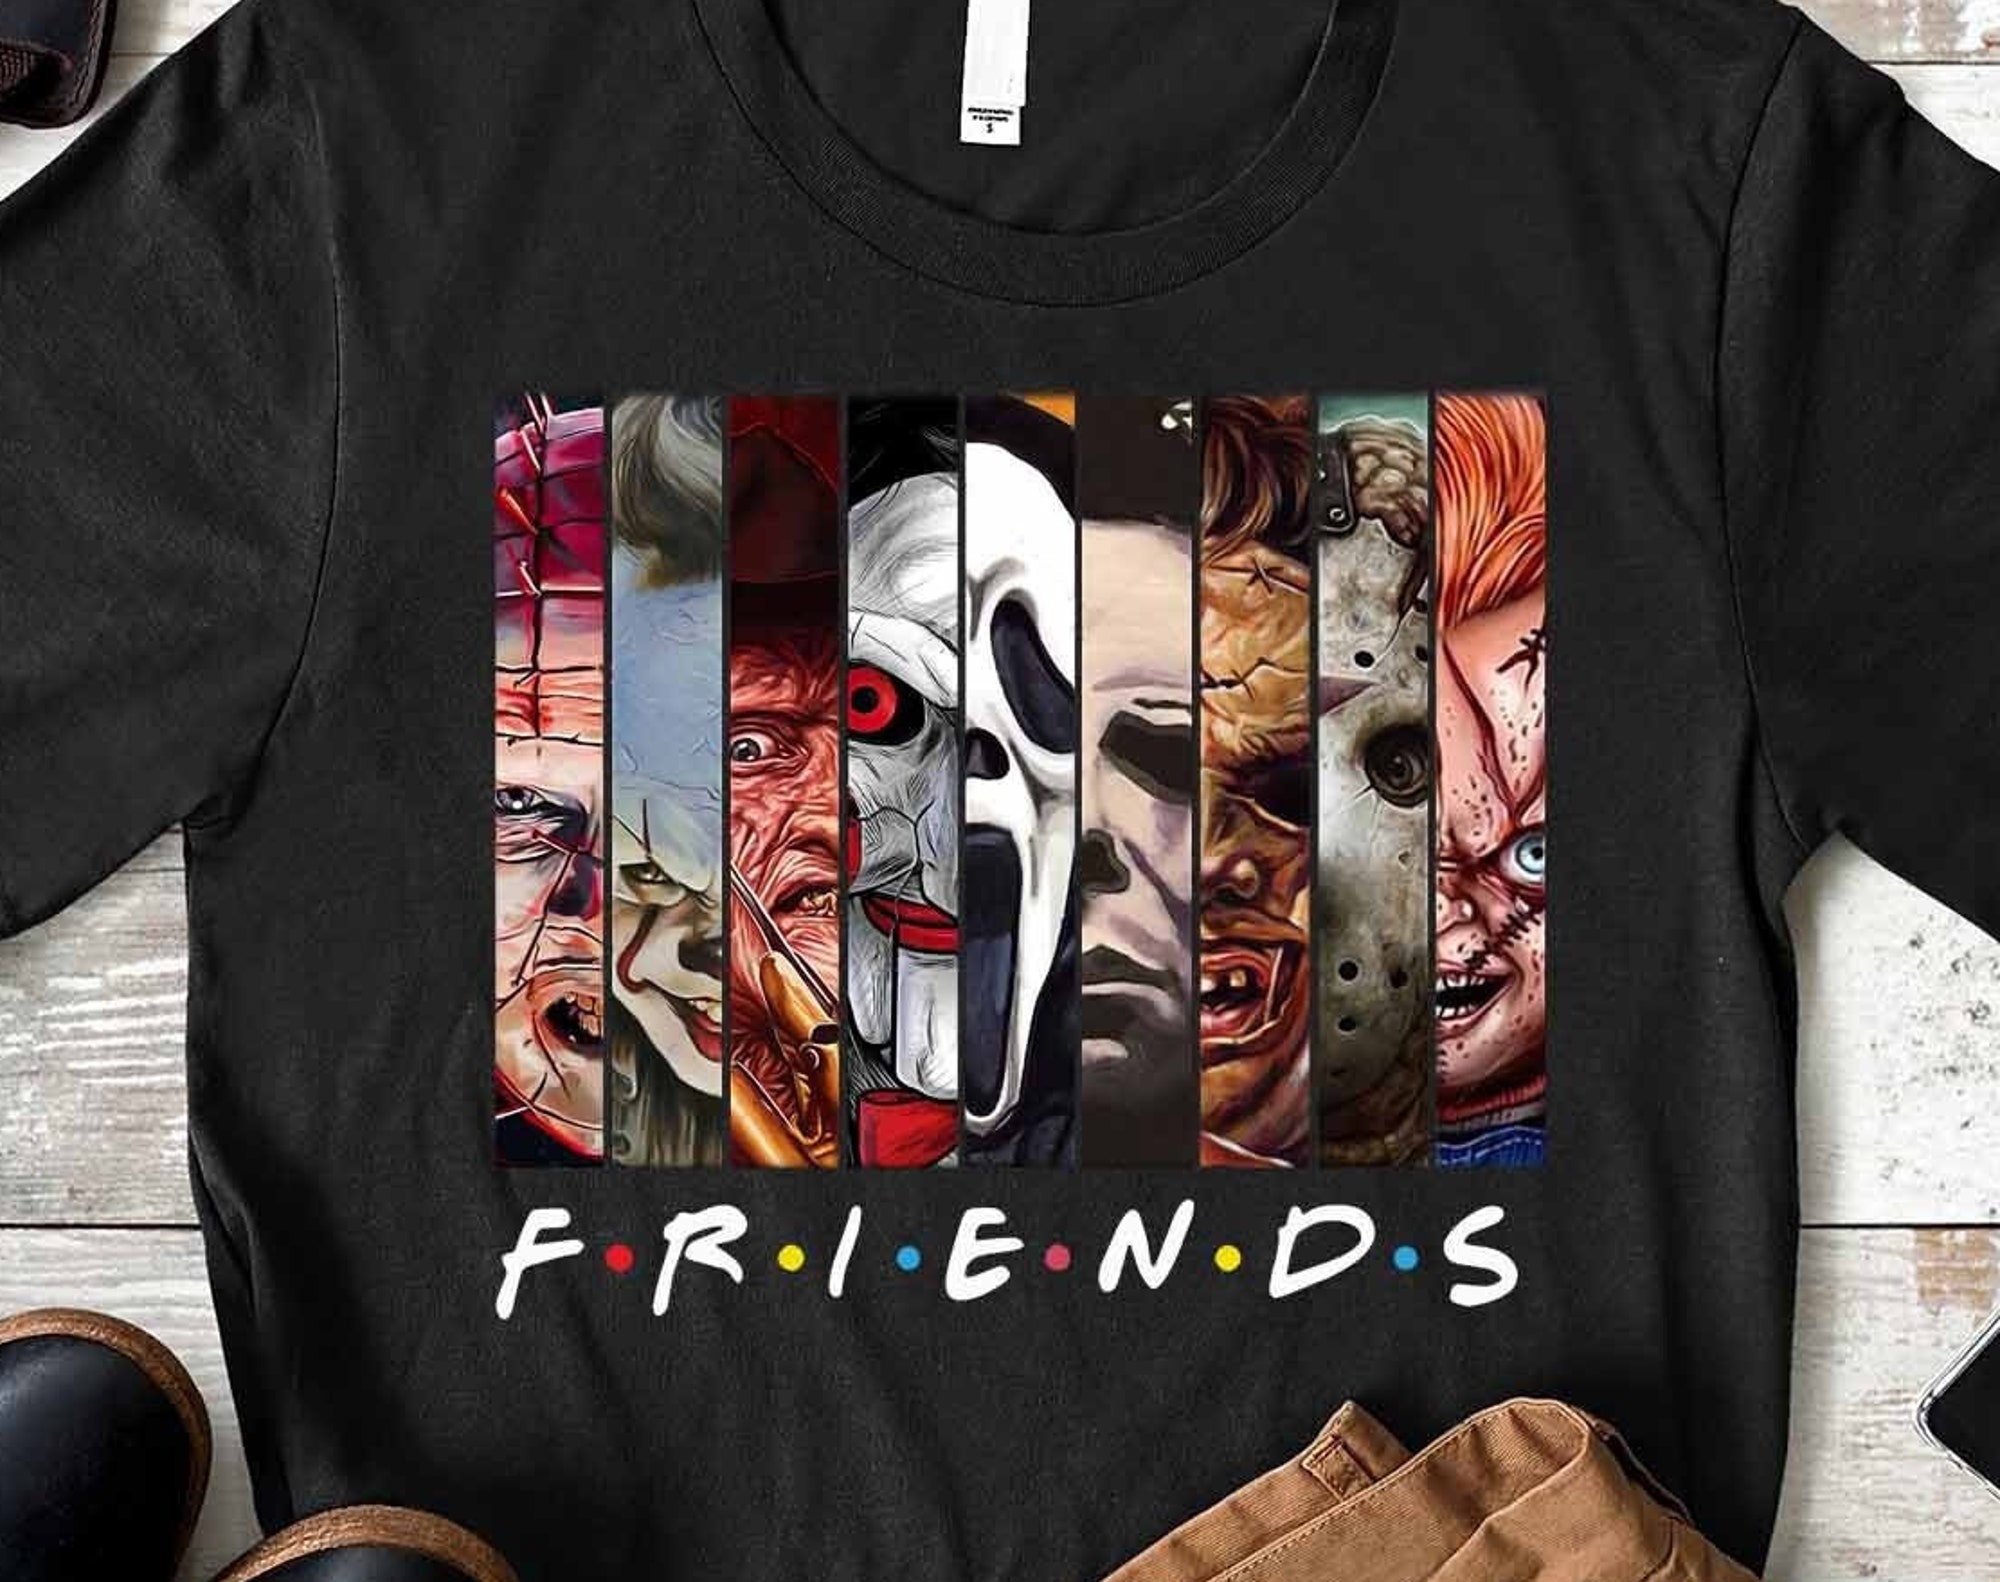 Discover Friends Halloween Shirt, Halloween Horror Movie Killers, Scary Friends Shirt, Scary Halloween Tees, Halloween T-Shirts, Horror Squad Shirt